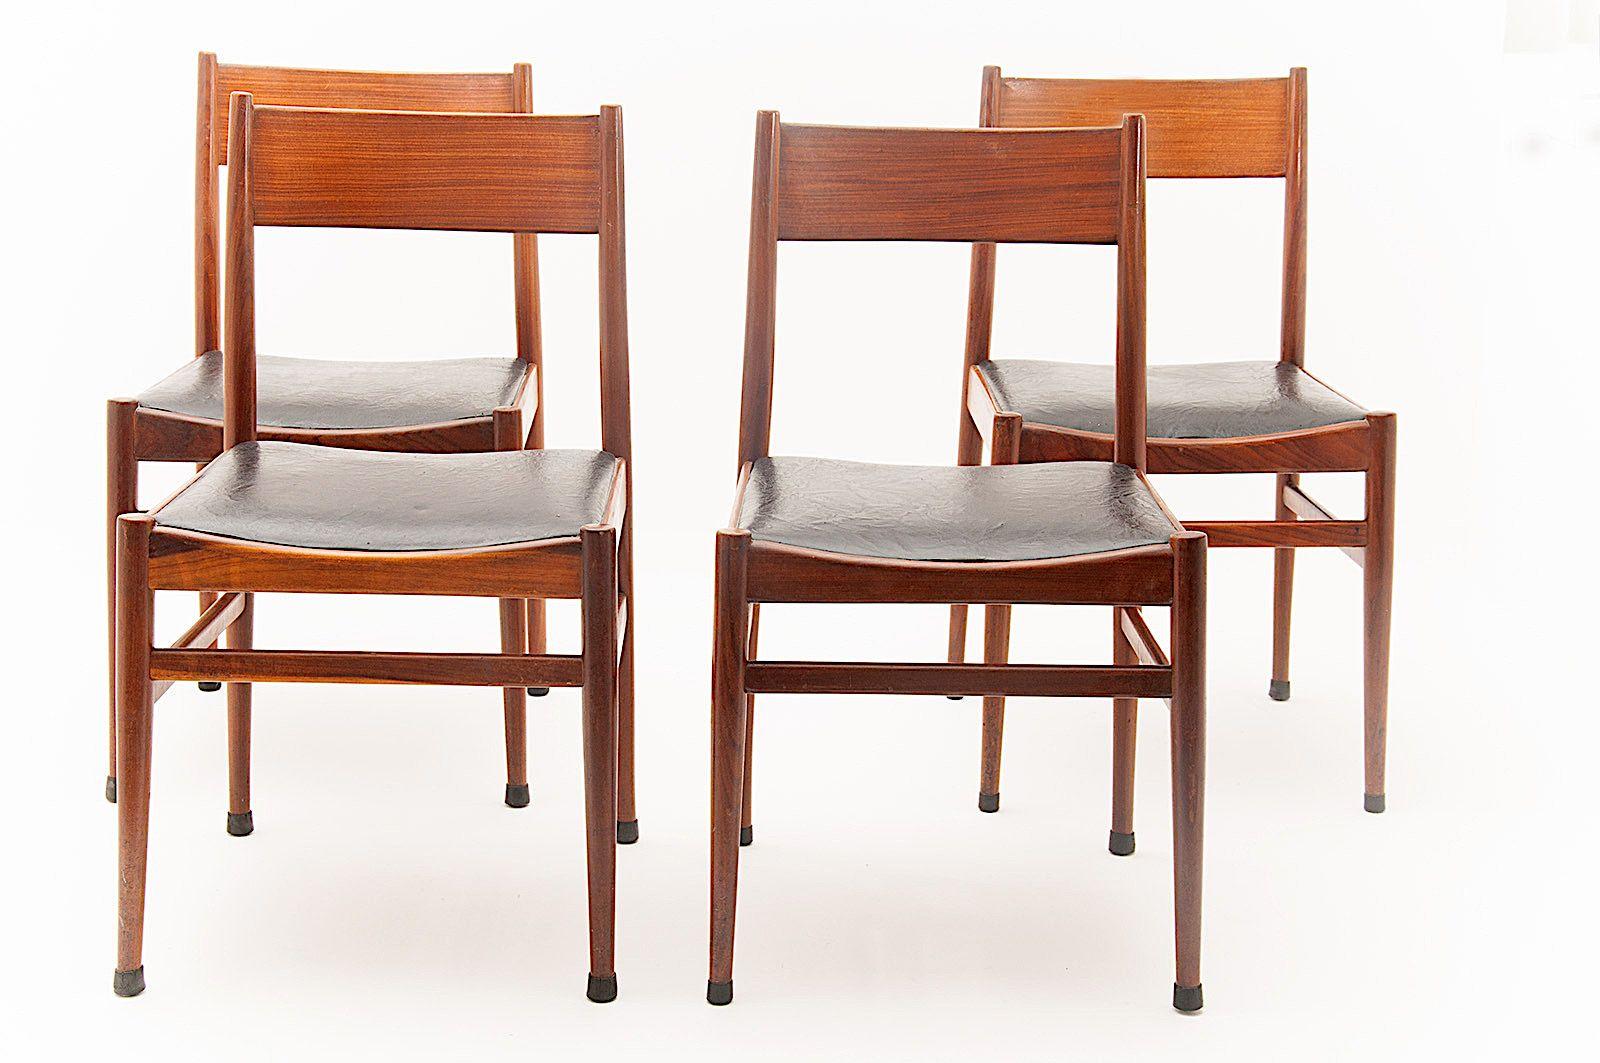 This 6 chairs look like midcentury Scandinavian design, but in fact they are Italian, and, were manufactured by Consorzio Sedie Friuli. The frame is in teak, of witch patterns are close to rosewood. The seat in black Vynil, and in vintage condition.